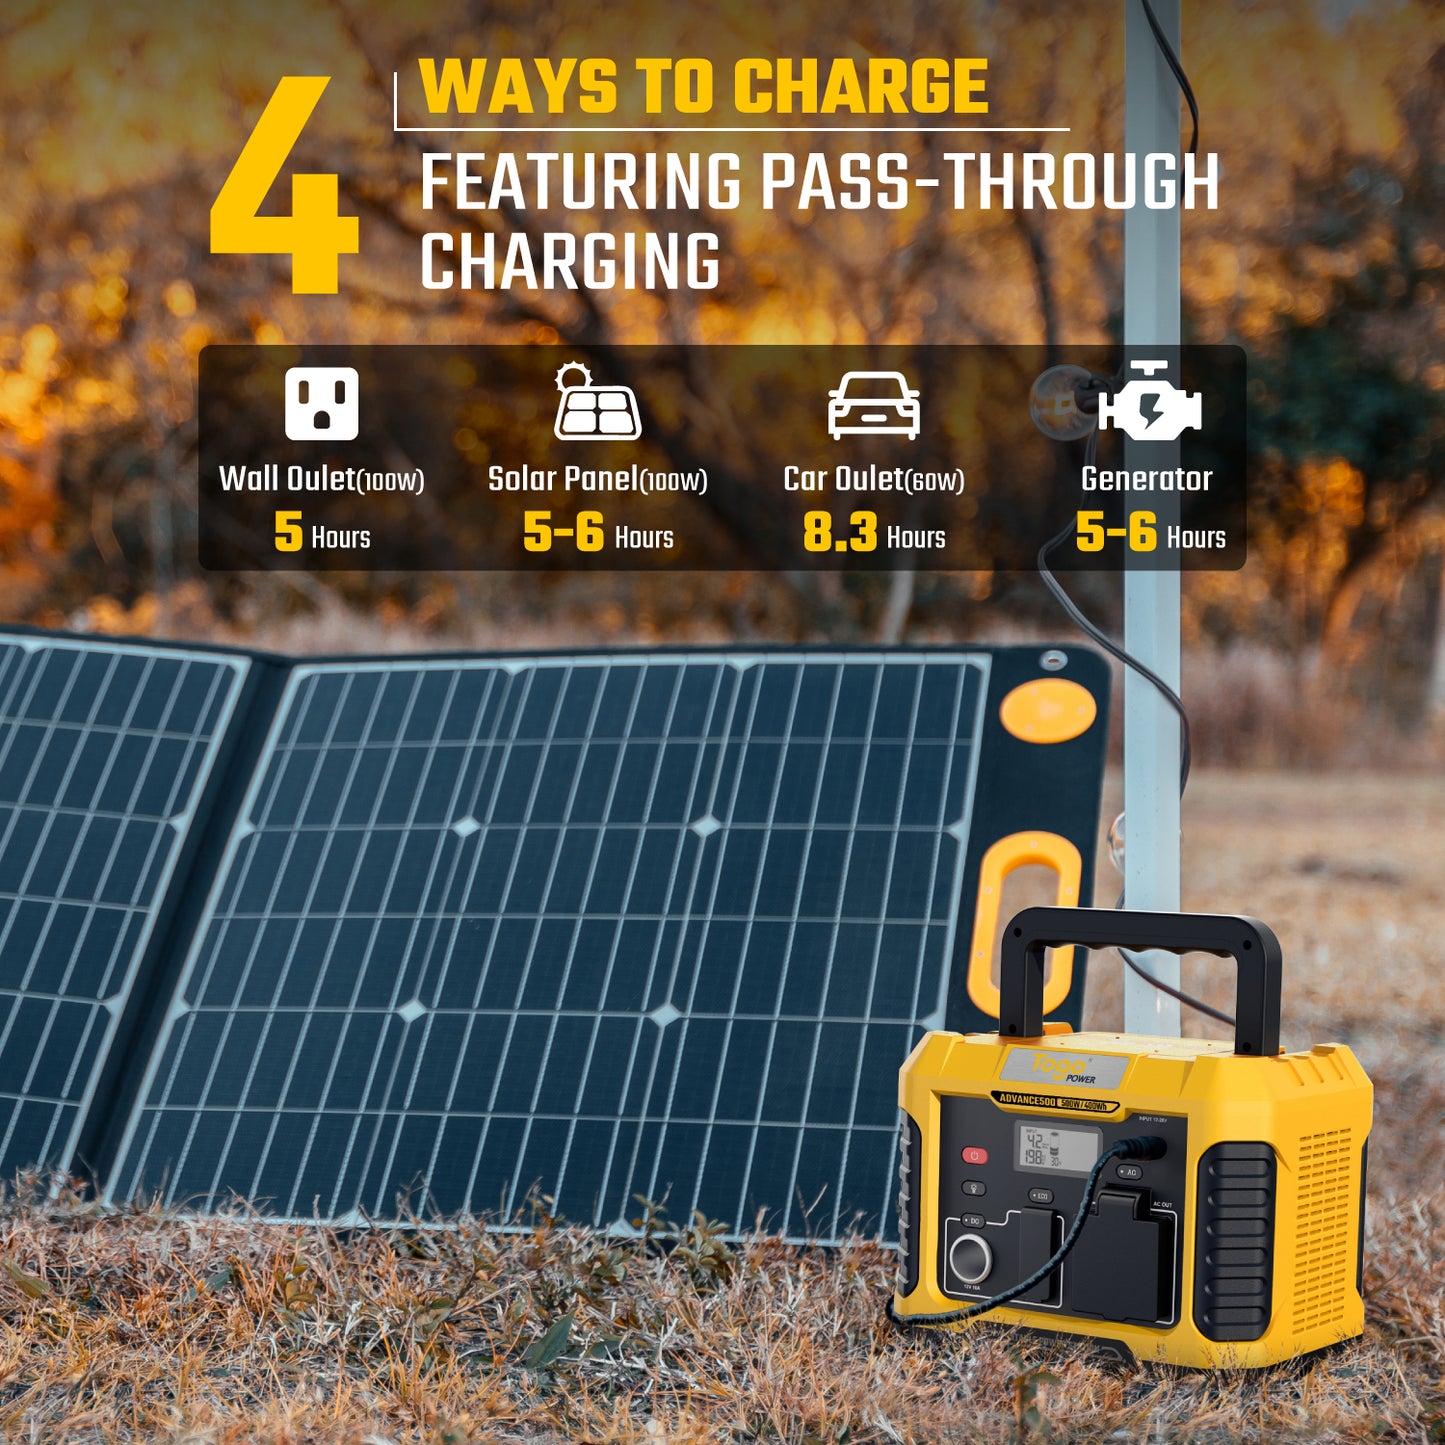 TogoPower Advance500, 400wh/500W Portable Power Station Backup Lithium Battery